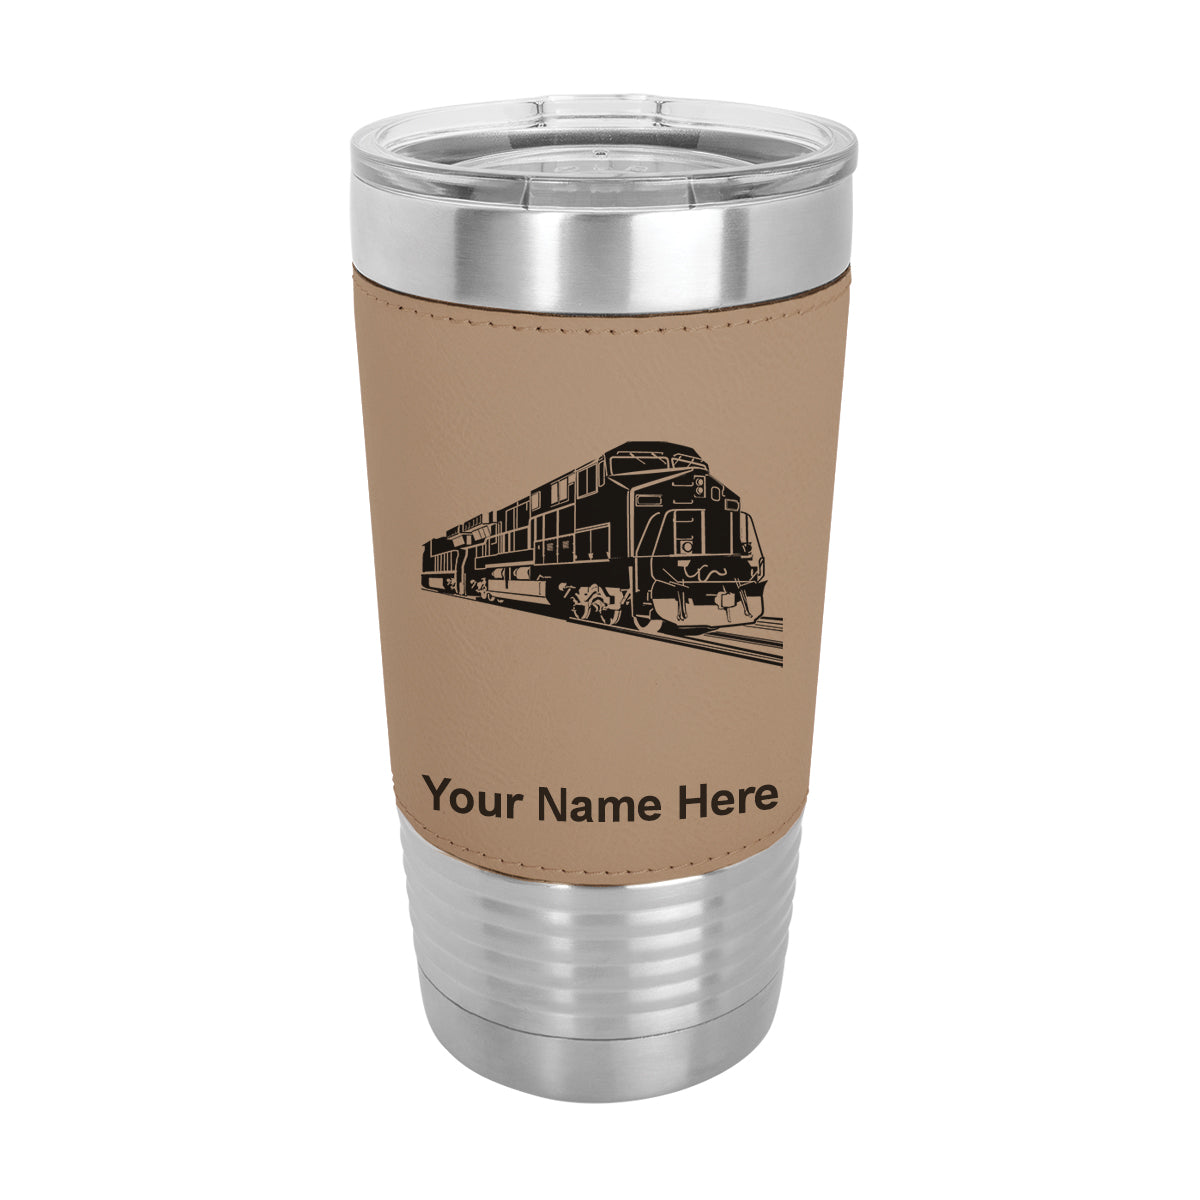 20oz Faux Leather Tumbler Mug, Freight Train, Personalized Engraving Included - LaserGram Custom Engraved Gifts